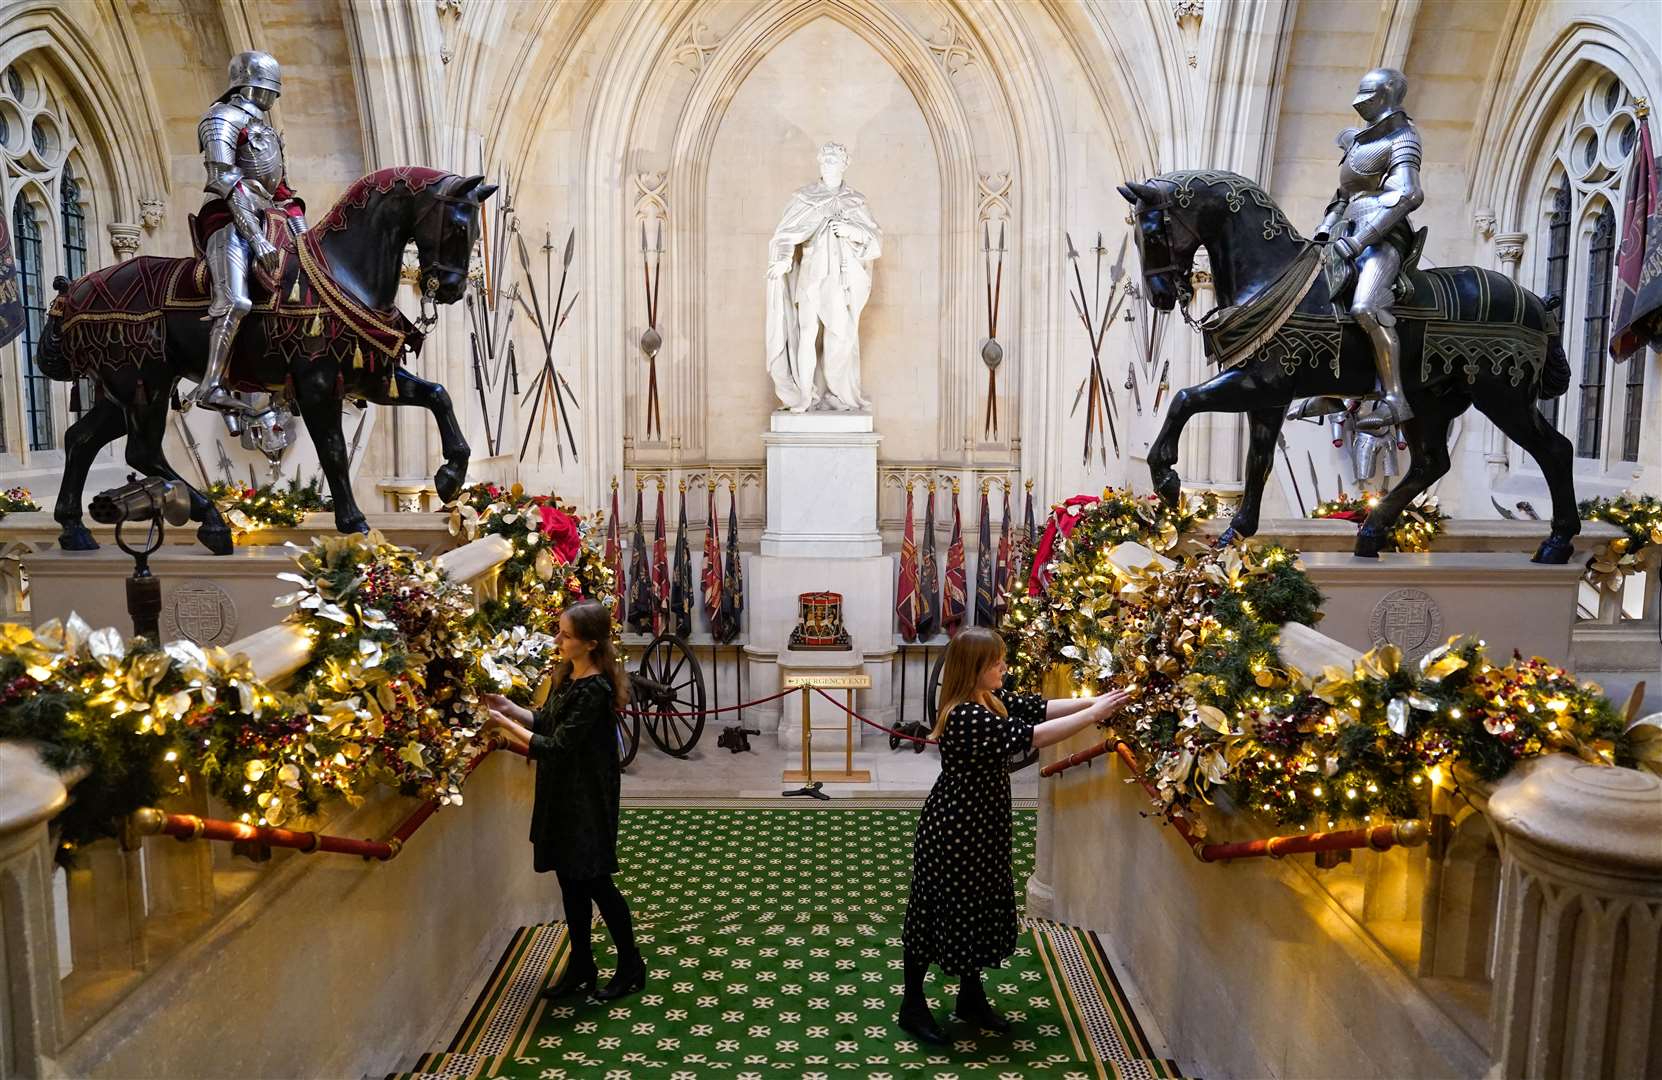 The Grand Staircase at Windsor (Andrew Matthews/PA)